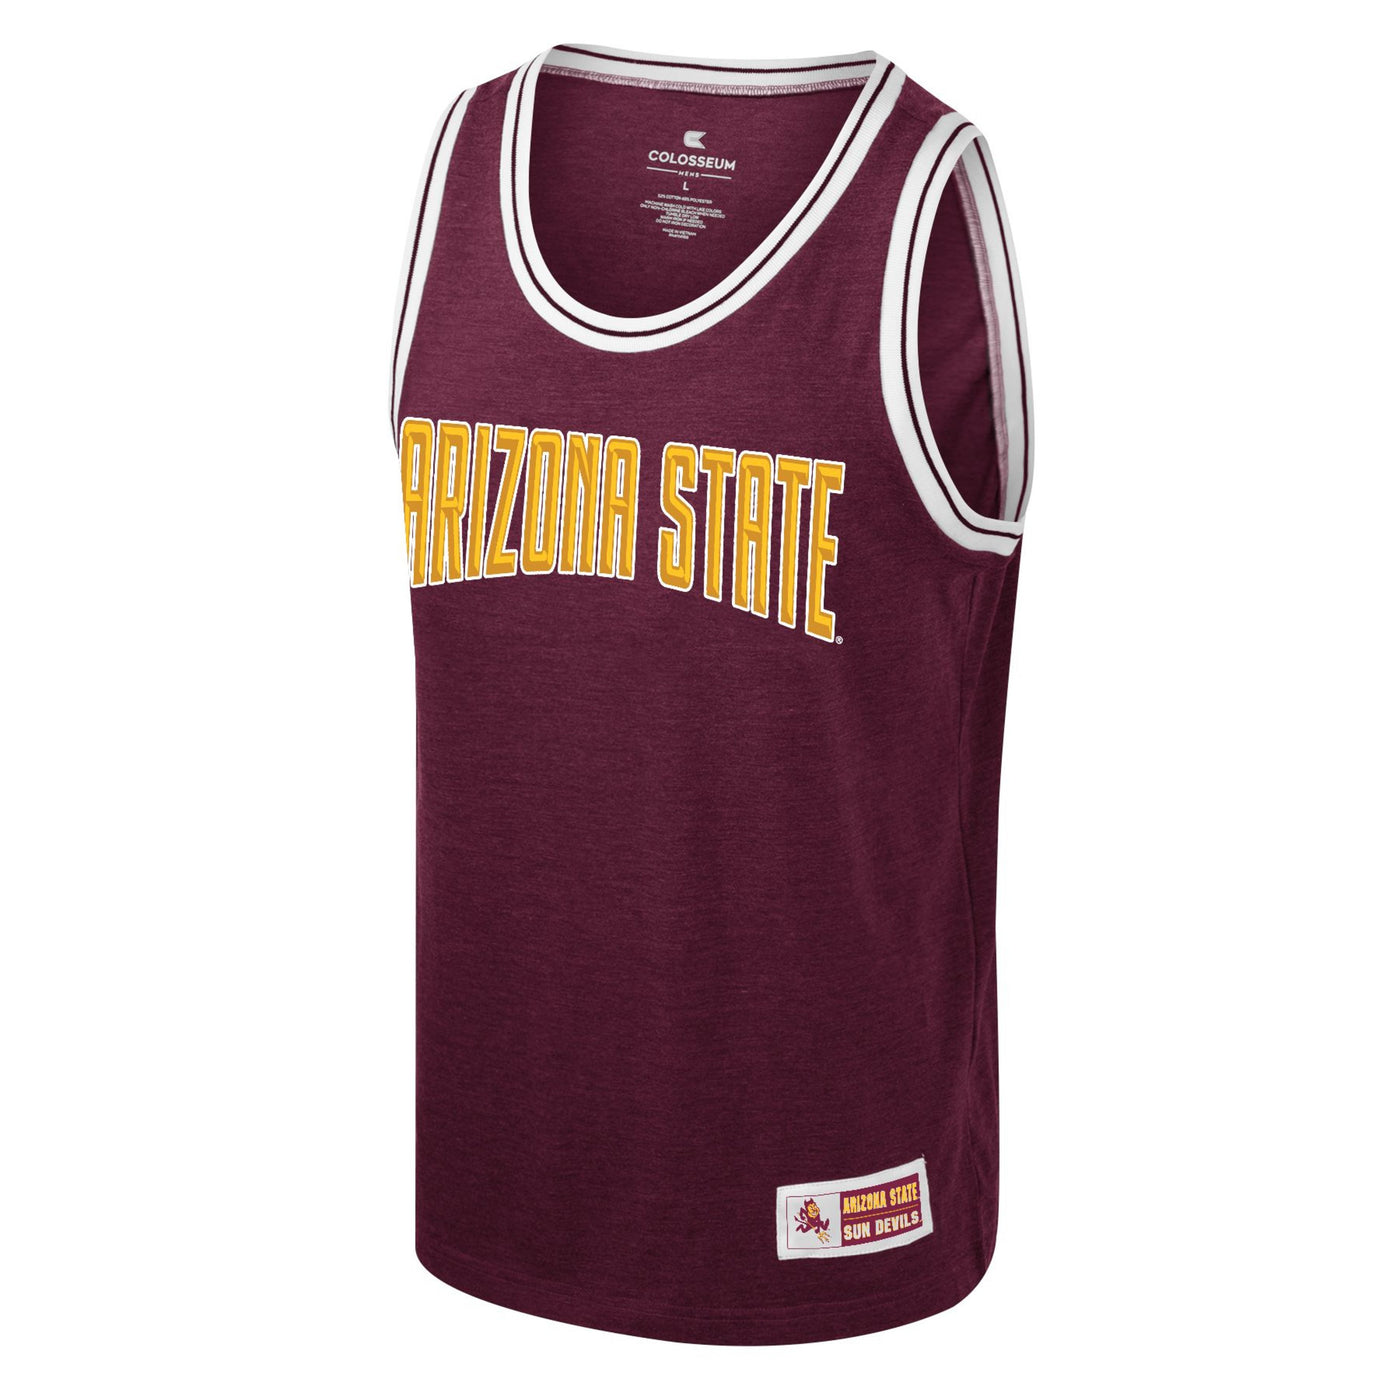 ASU youth maroon basketball tank with white trim around arm and neck holes. Centered across the chest gold text 'Arizona State